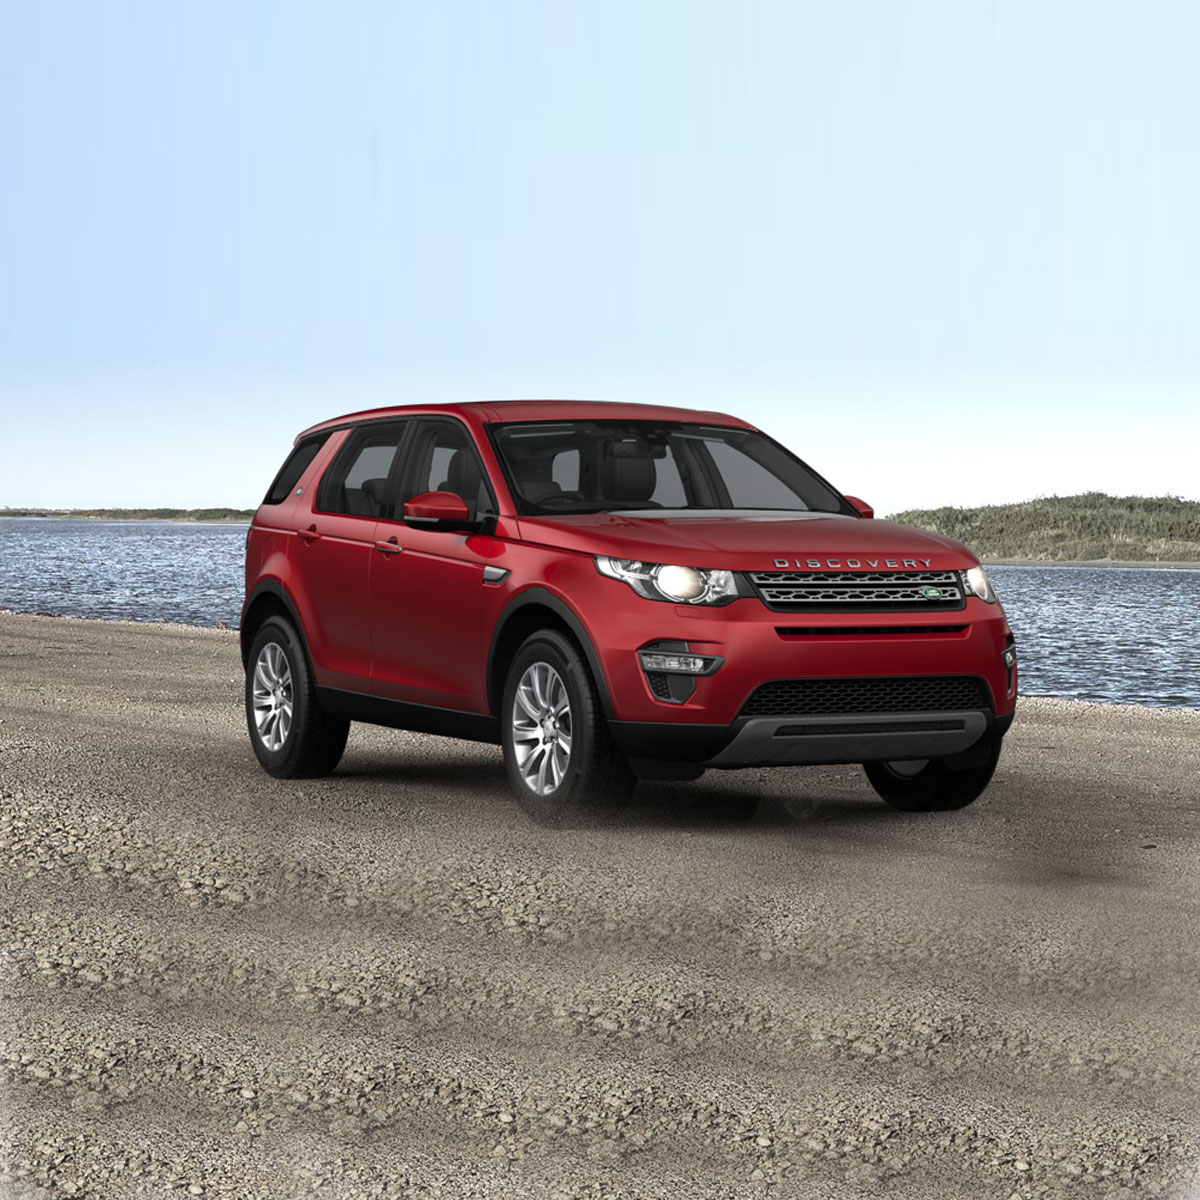 Land Rover Discovery Si 4 Petrol front cross view